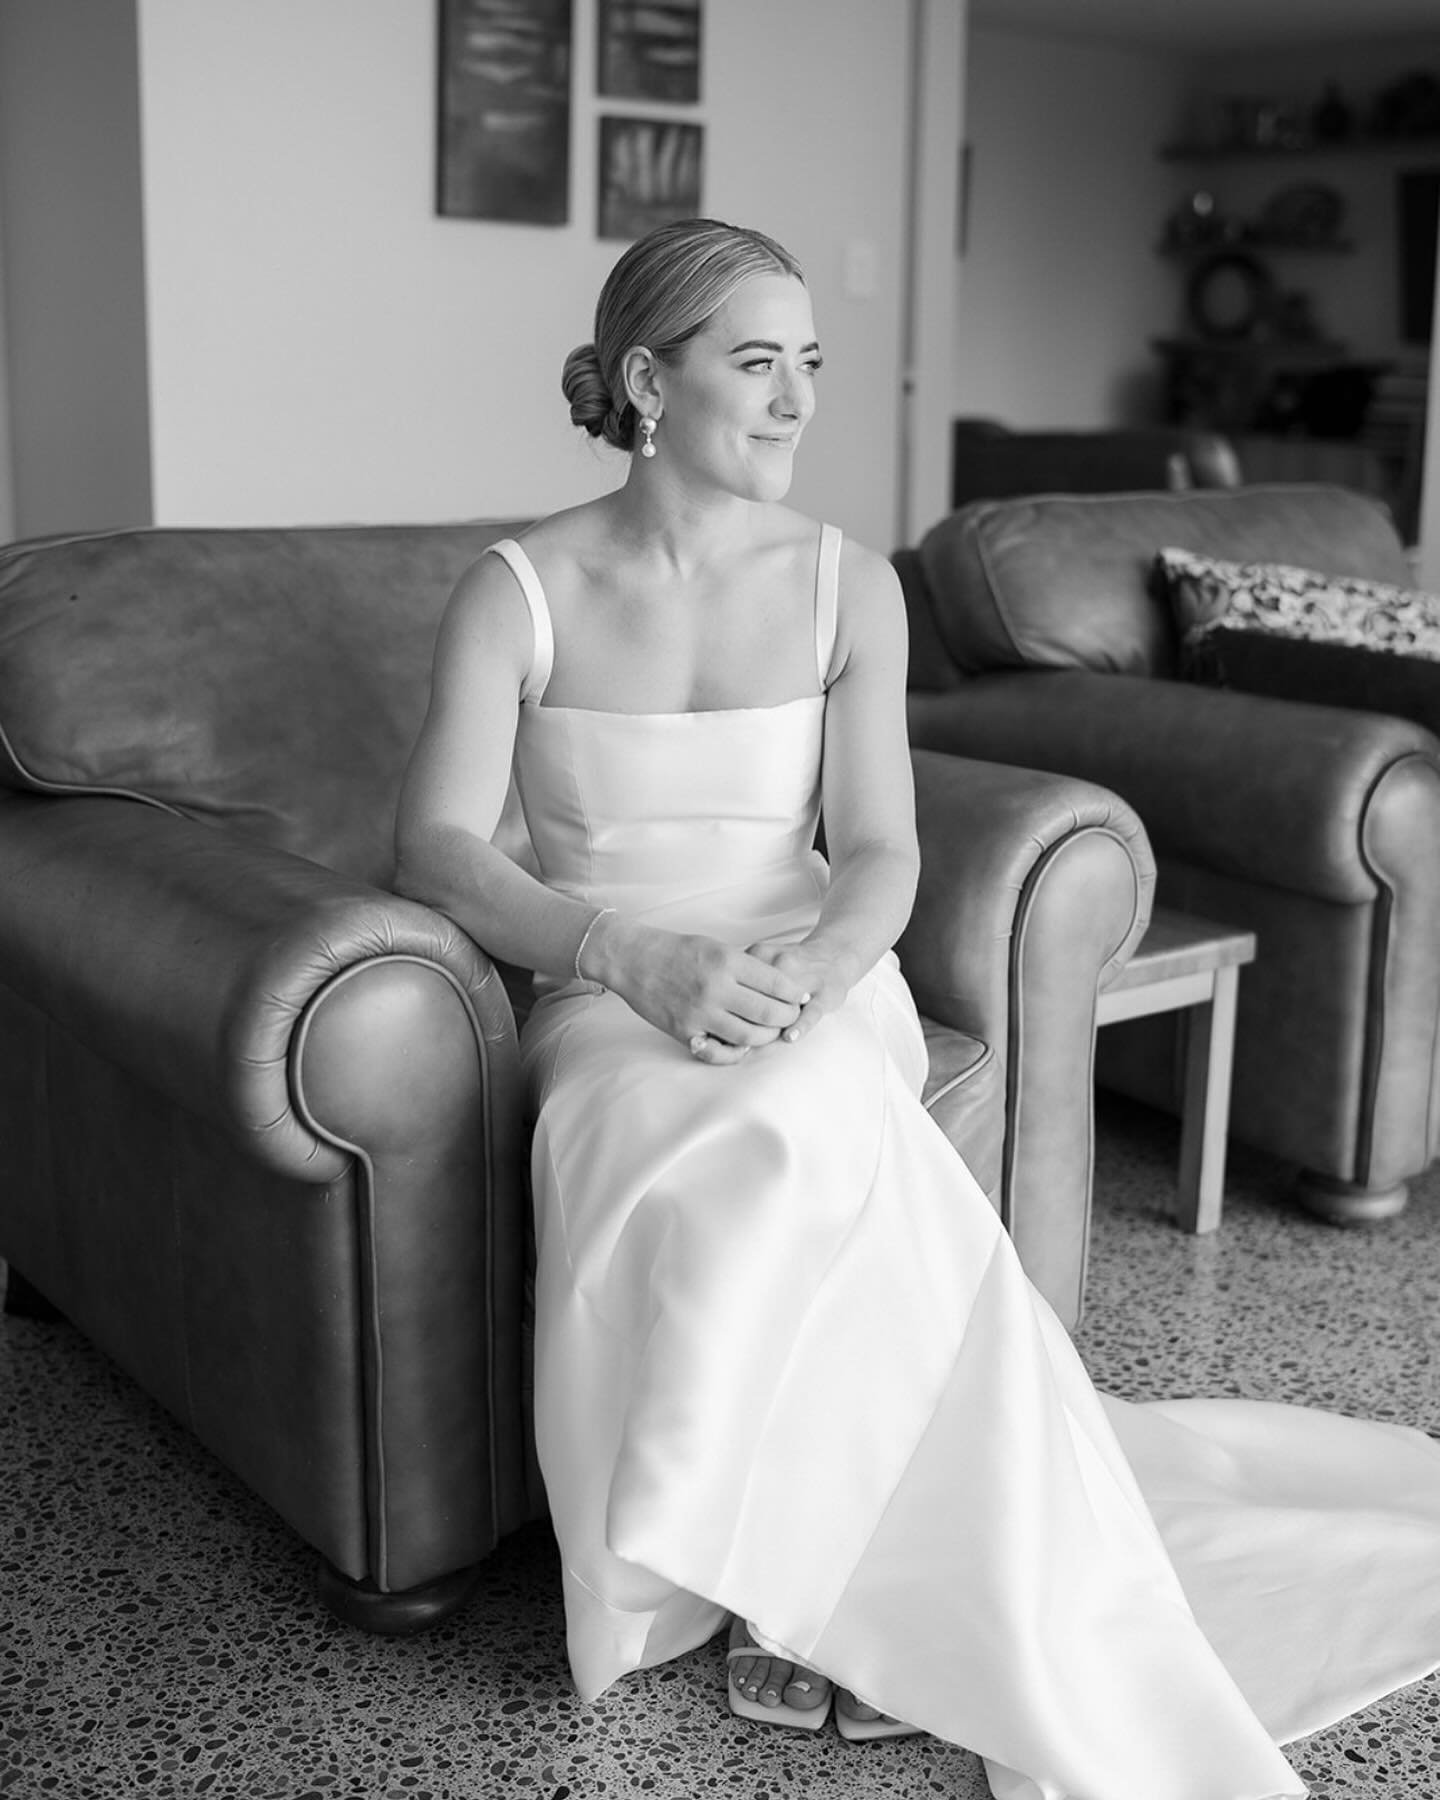 Kind words | Emily 

We were lucky enough to work with many fabulous, easy-going vendors. One standout would be our photographer &ndash; Sarah from Amour Weddings. From her organisation in the lead up, her advice on timings for the day, blog posts ex